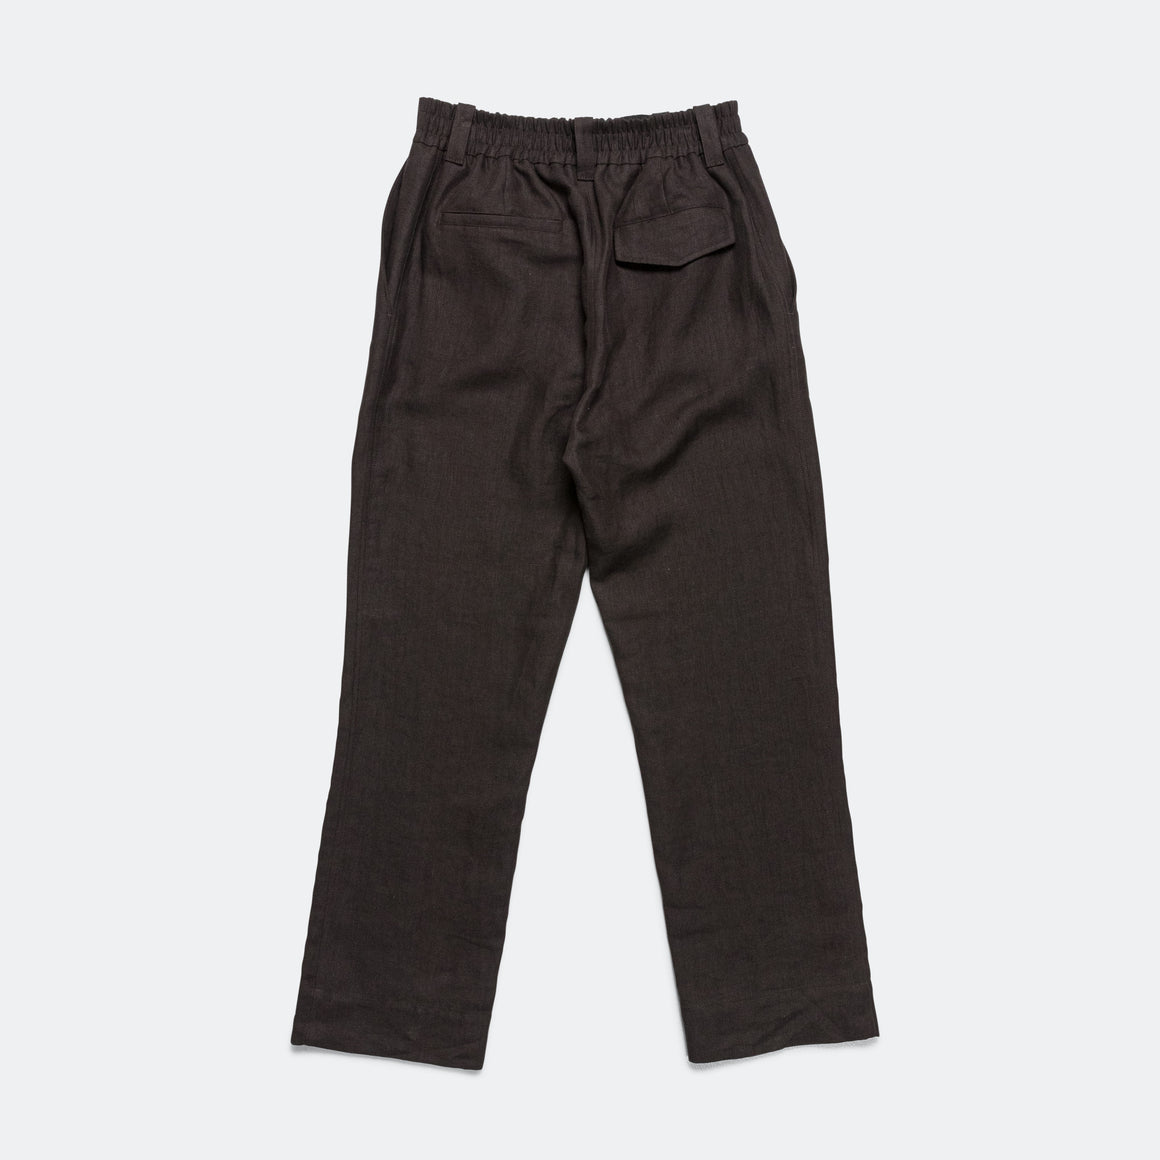 Margaret Howell - Relaxed Pleated Trouser - Dark Brown Compact Linen Twill - UP THERE